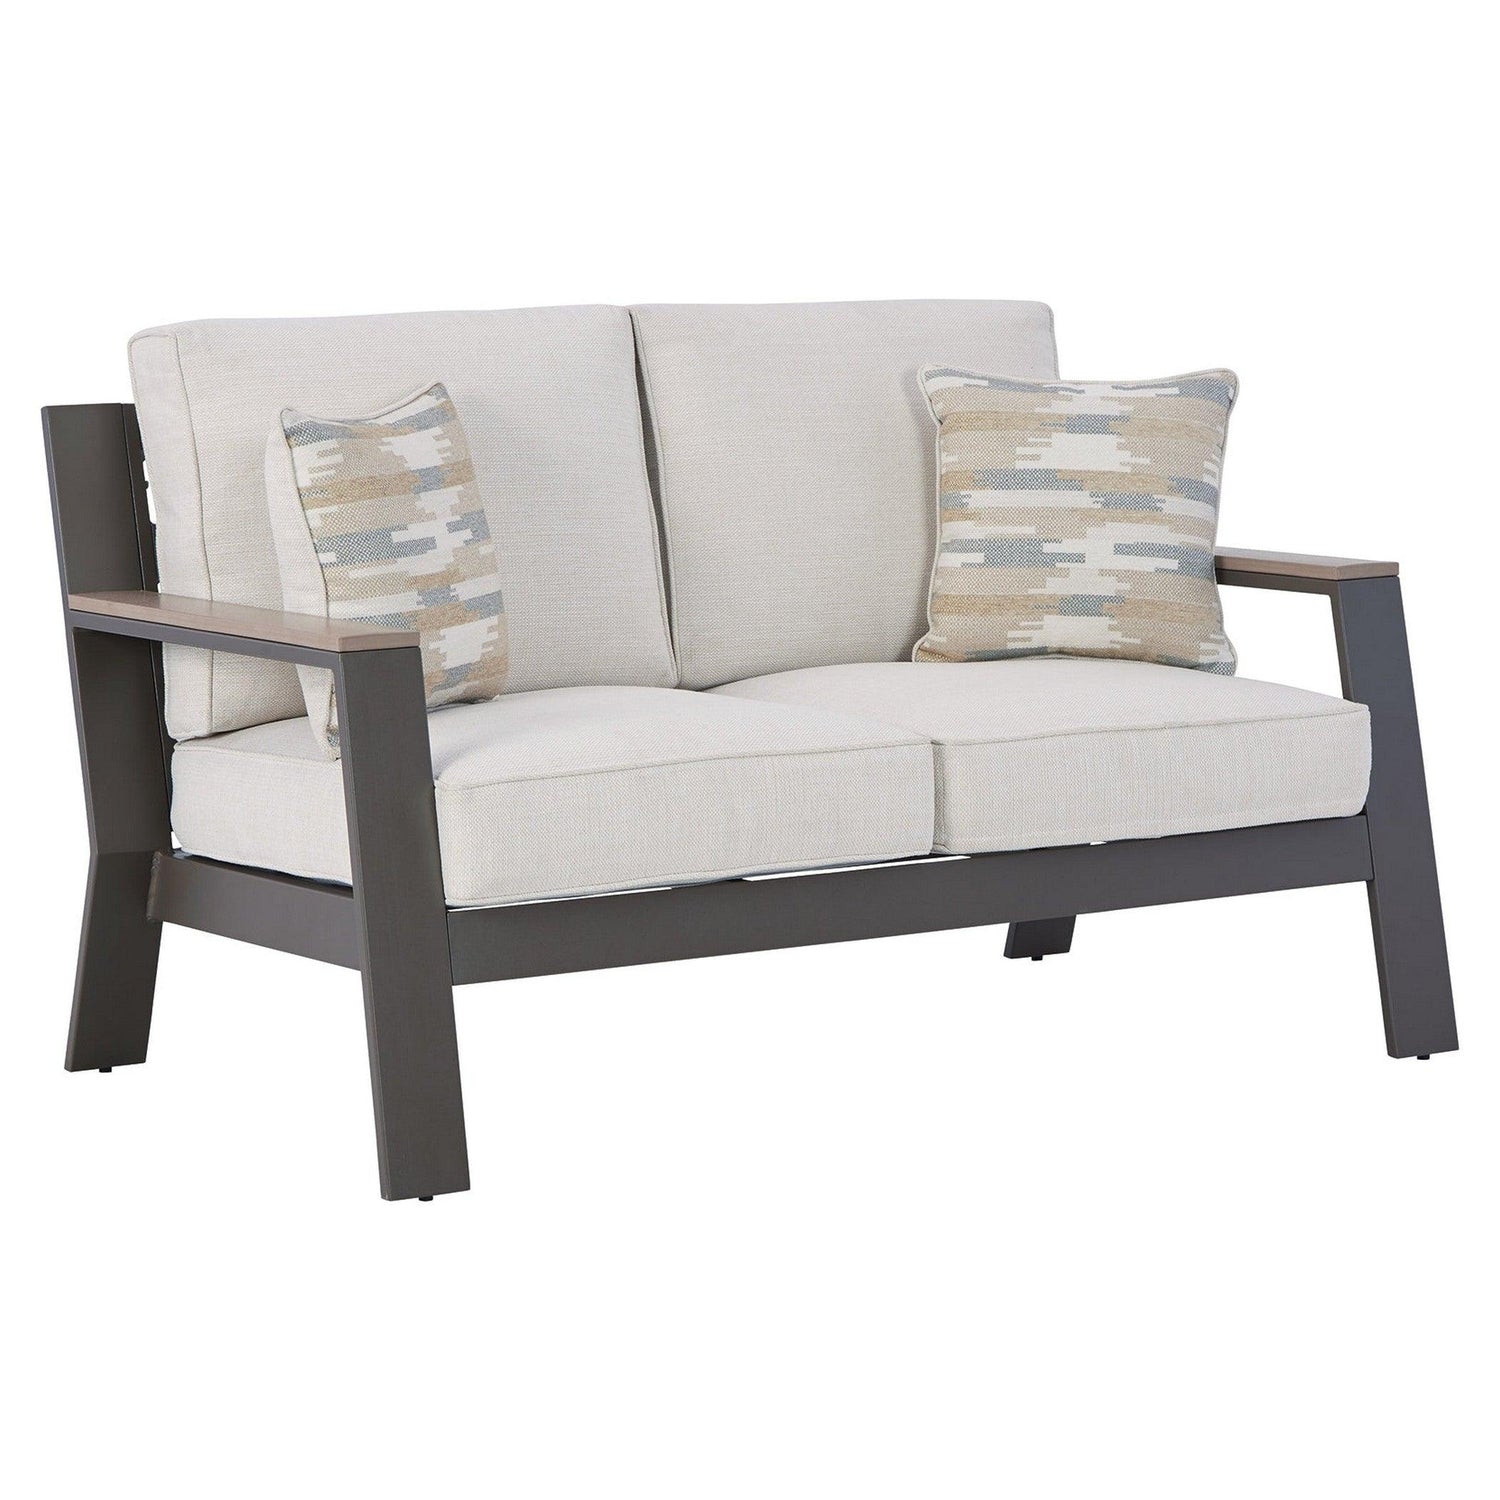 Tropicava Outdoor Loveseat with Cushion Ash-P514-835